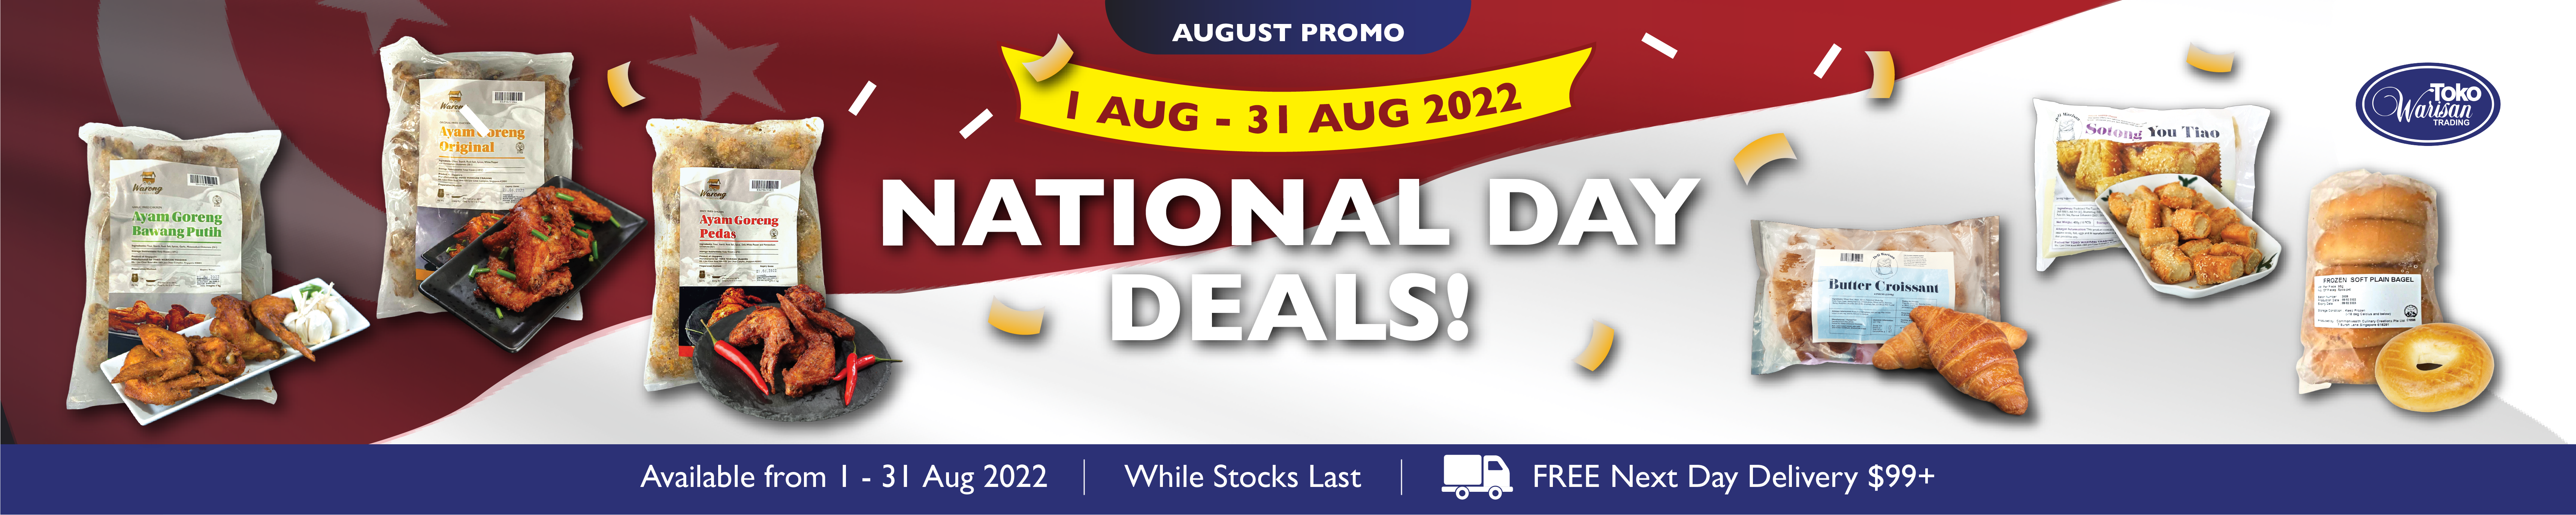 august monthly promotion national day deals